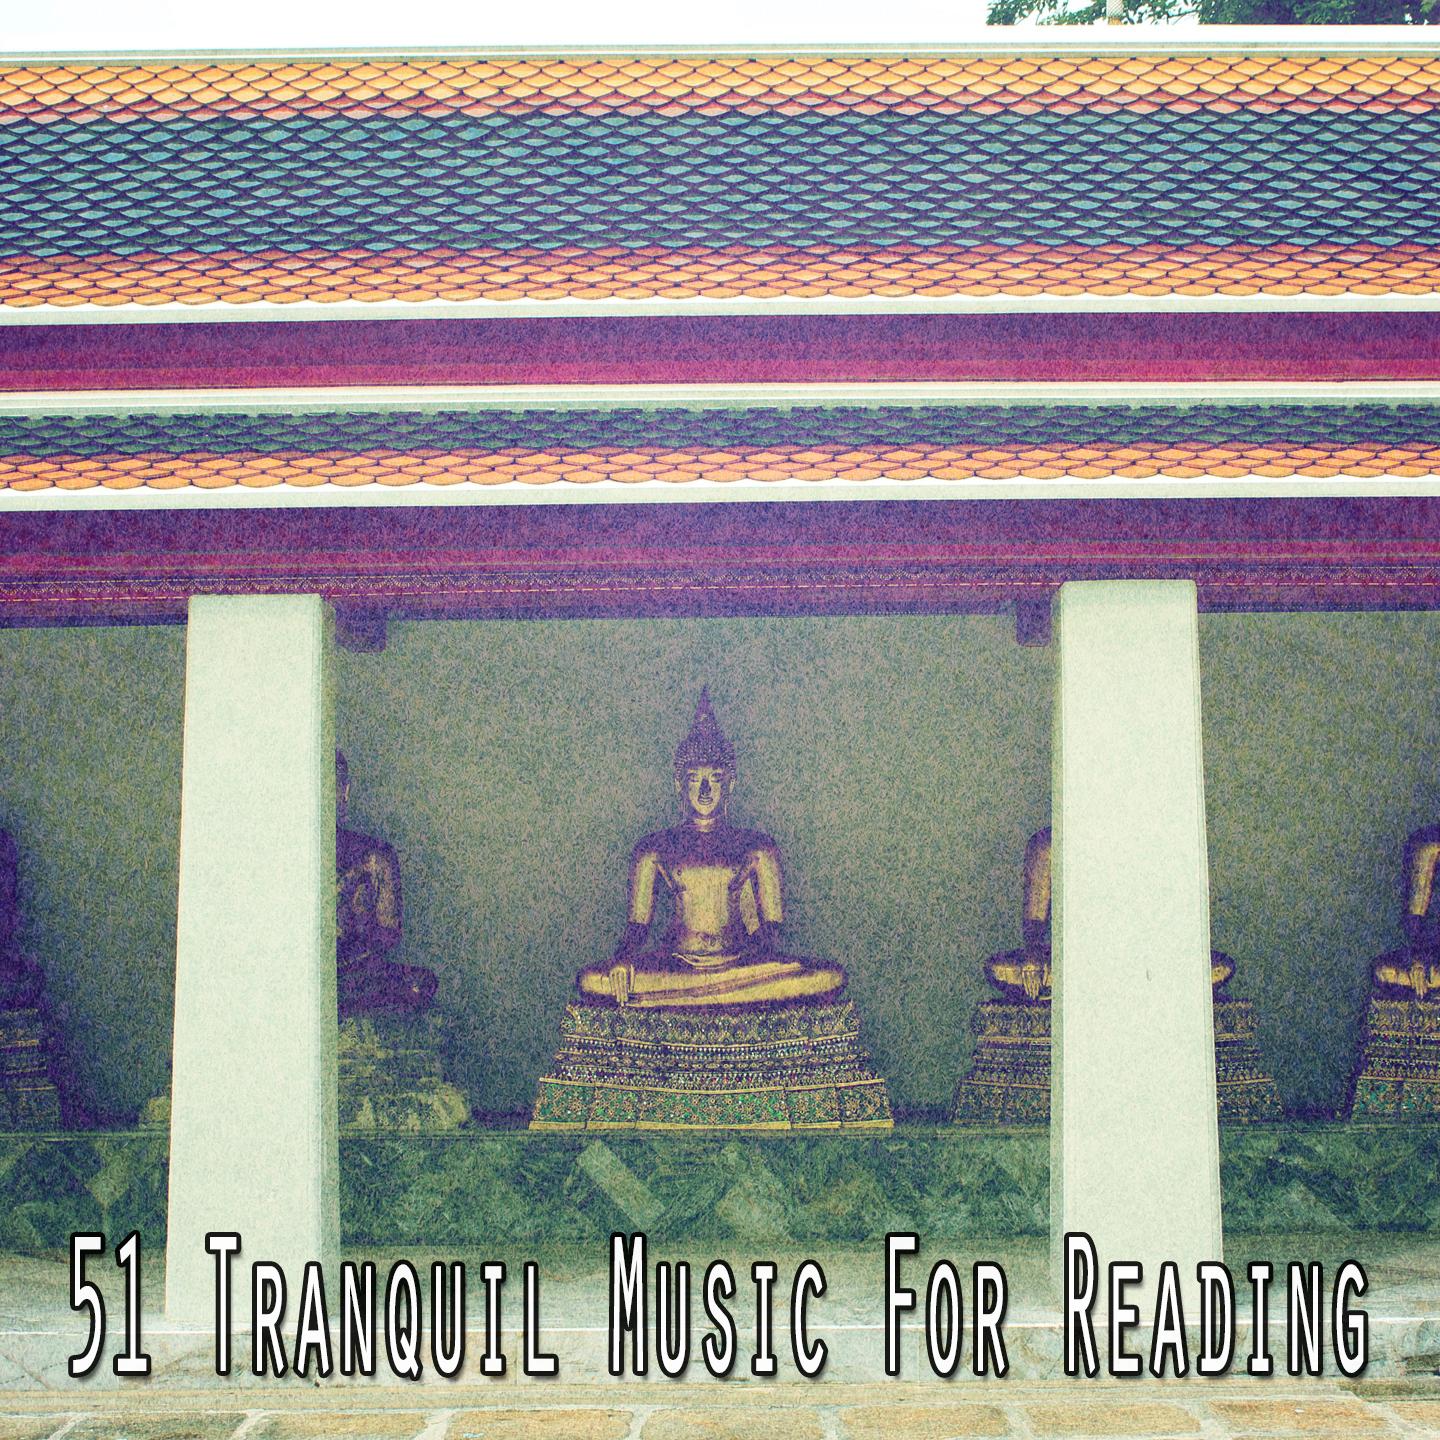 51 Tranquil Music for Reading